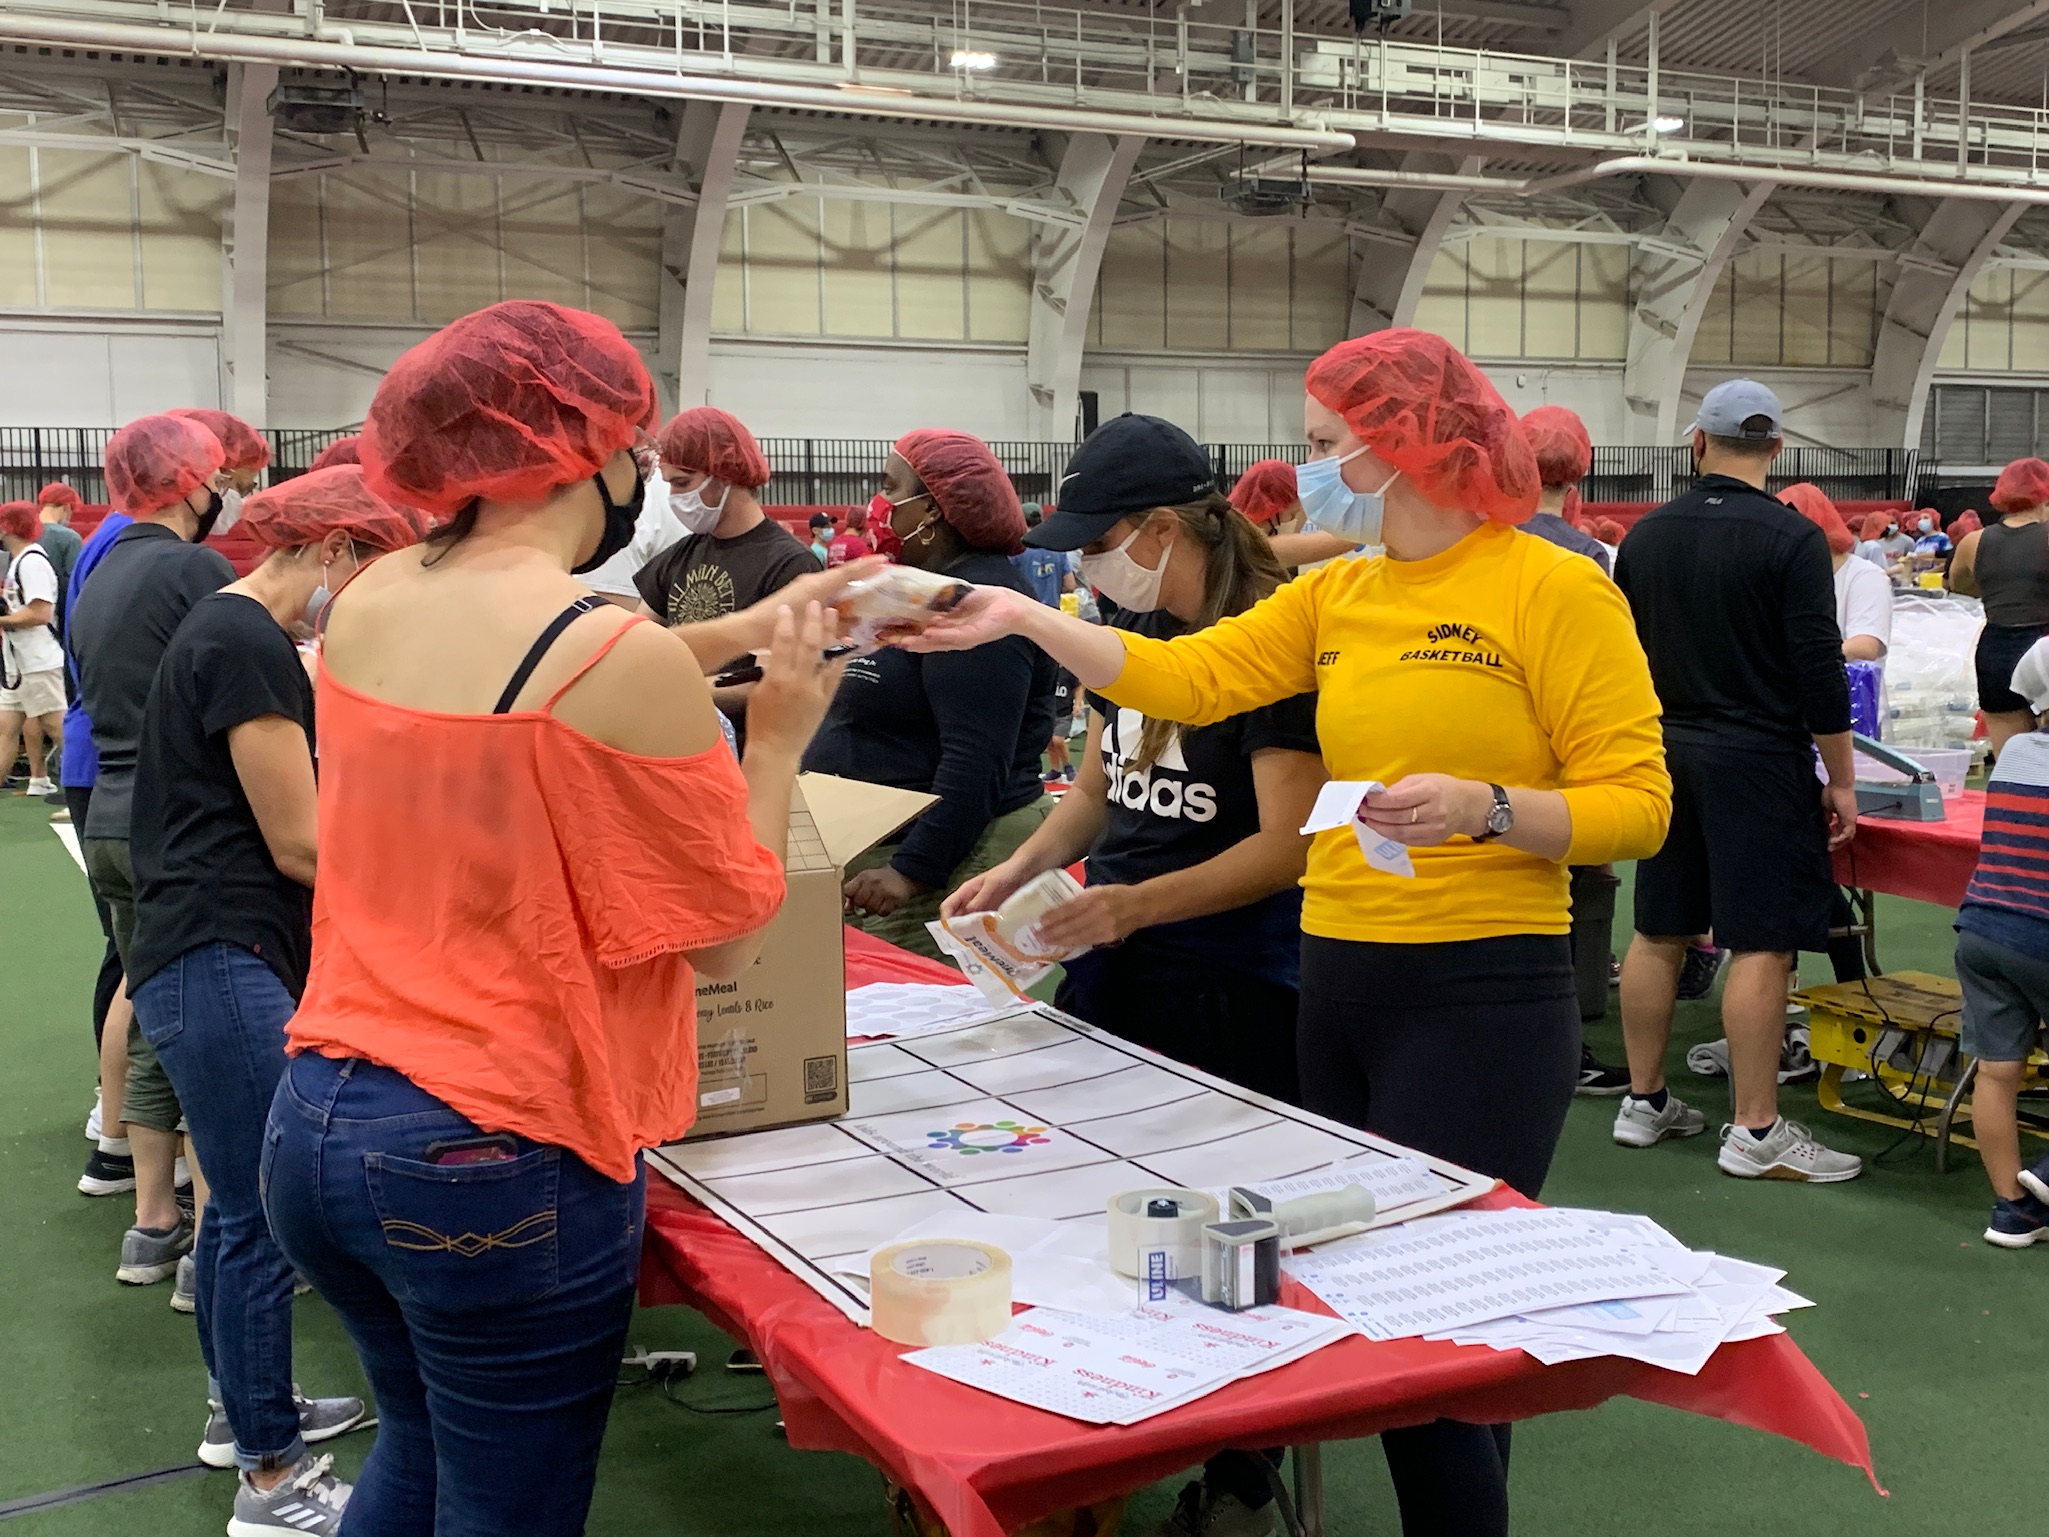 Ohio State Food Packing Event Benefits Food Insecure Communities in Ohio